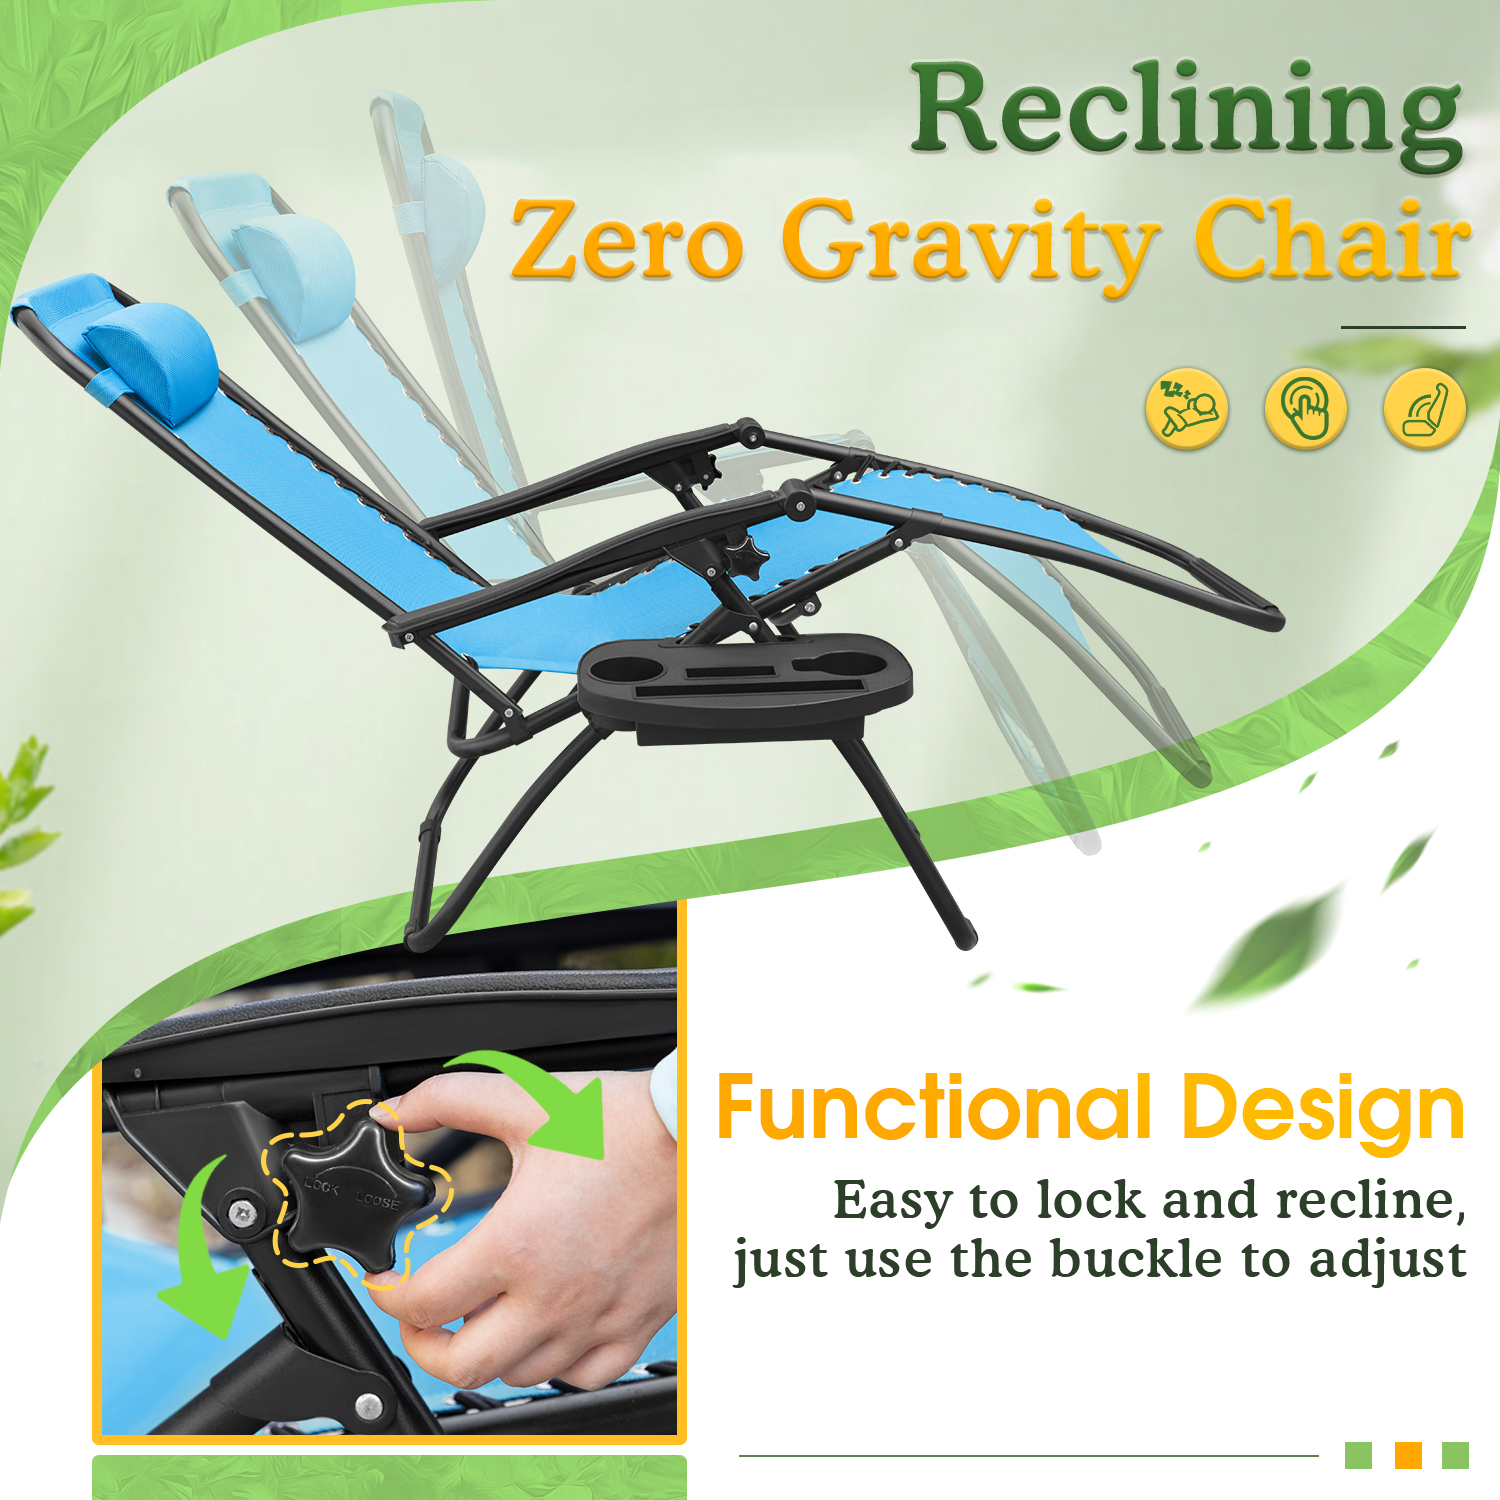 Lacoo Patio Zero Gravity Chair Outdoor Adjustable Recline Chair seating capacity 2, Light Blue - image 4 of 7